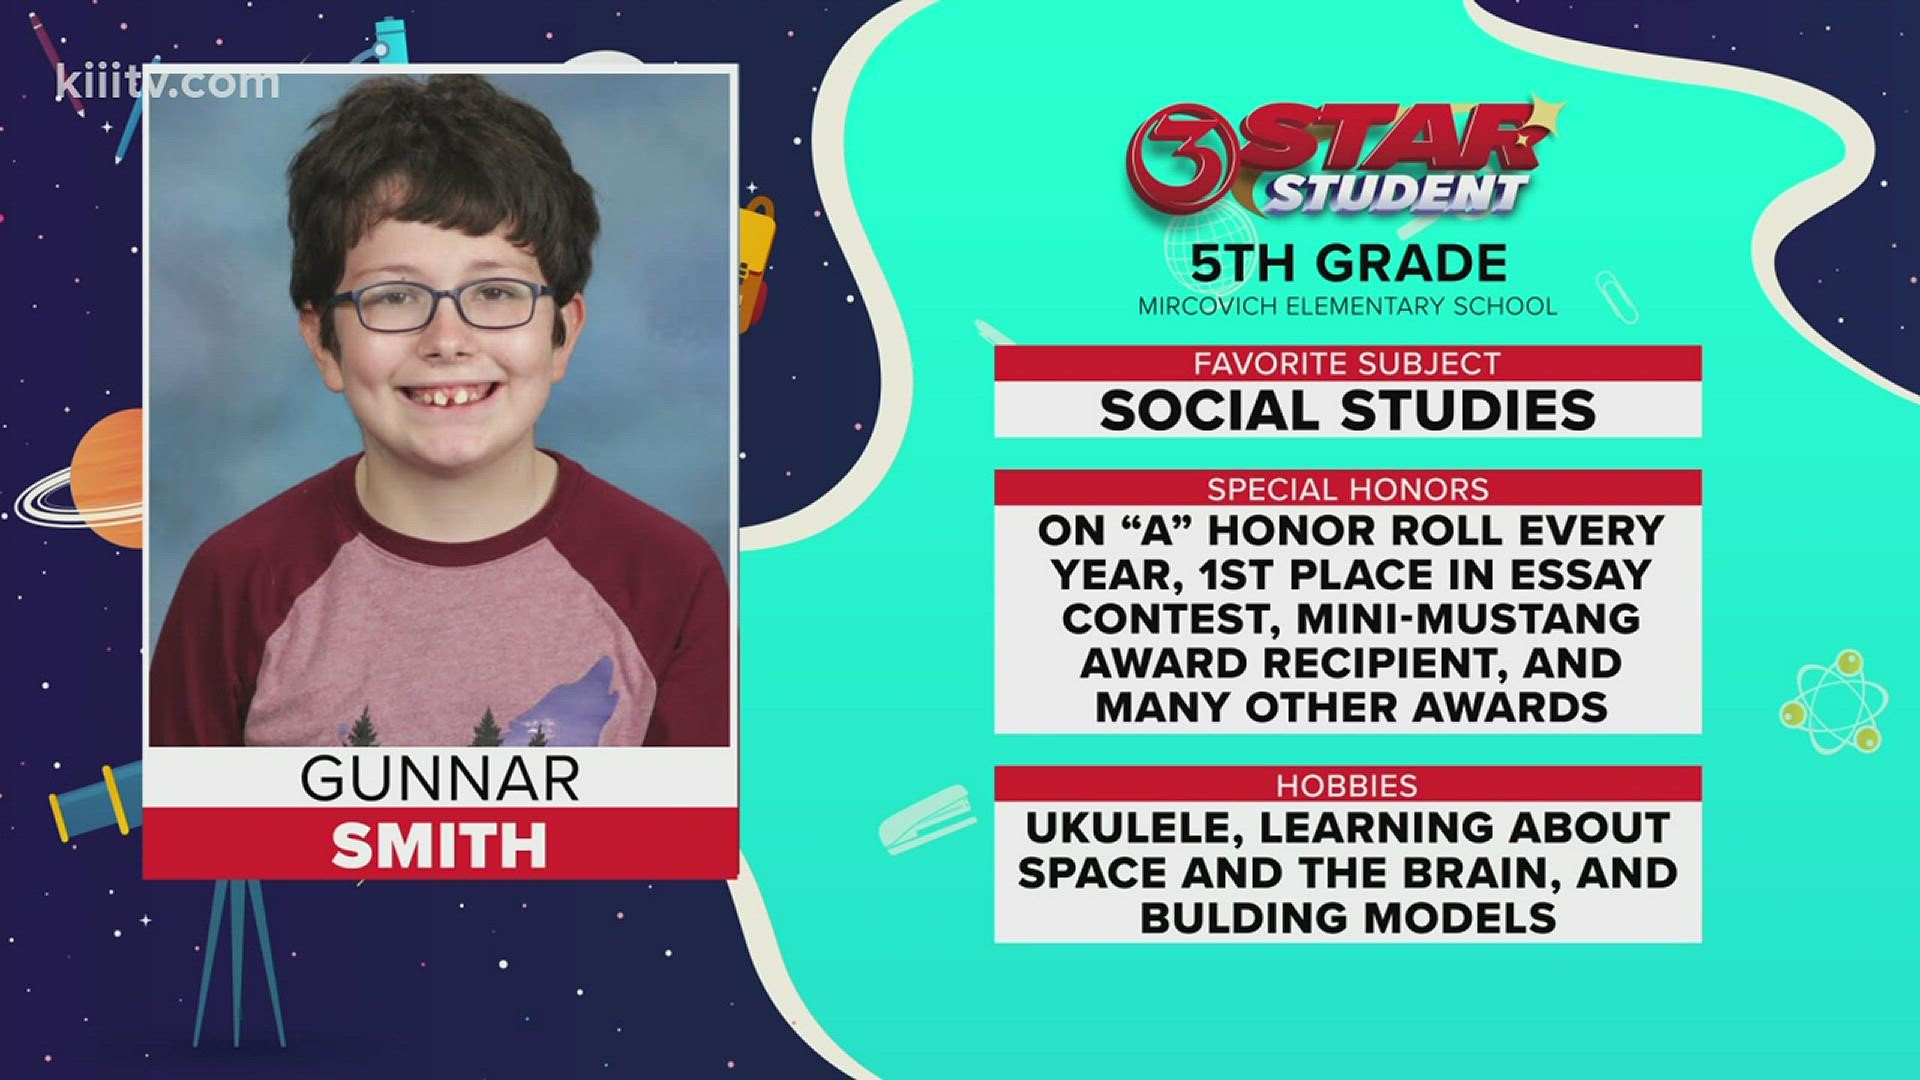 It's time to meet our 3Star Student of the week... Gunnar!